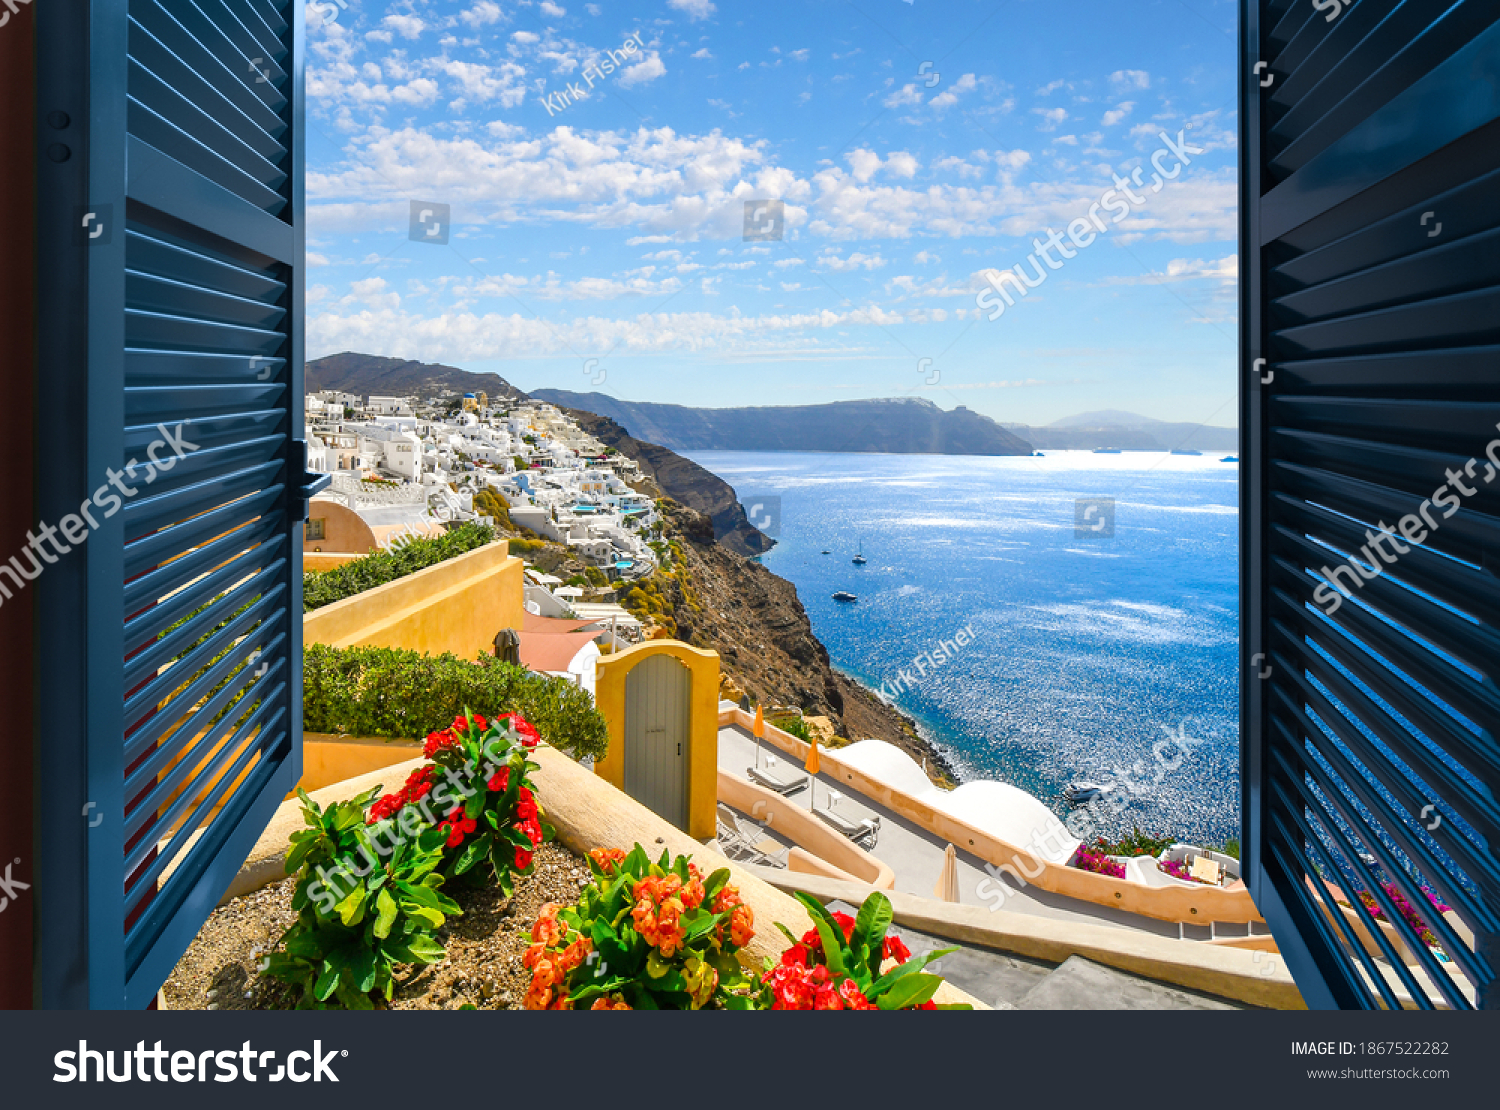 View through an open window of the Aegean Sea, caldera and town of Oia and Thira on the island of Santorini Greece. #1867522282